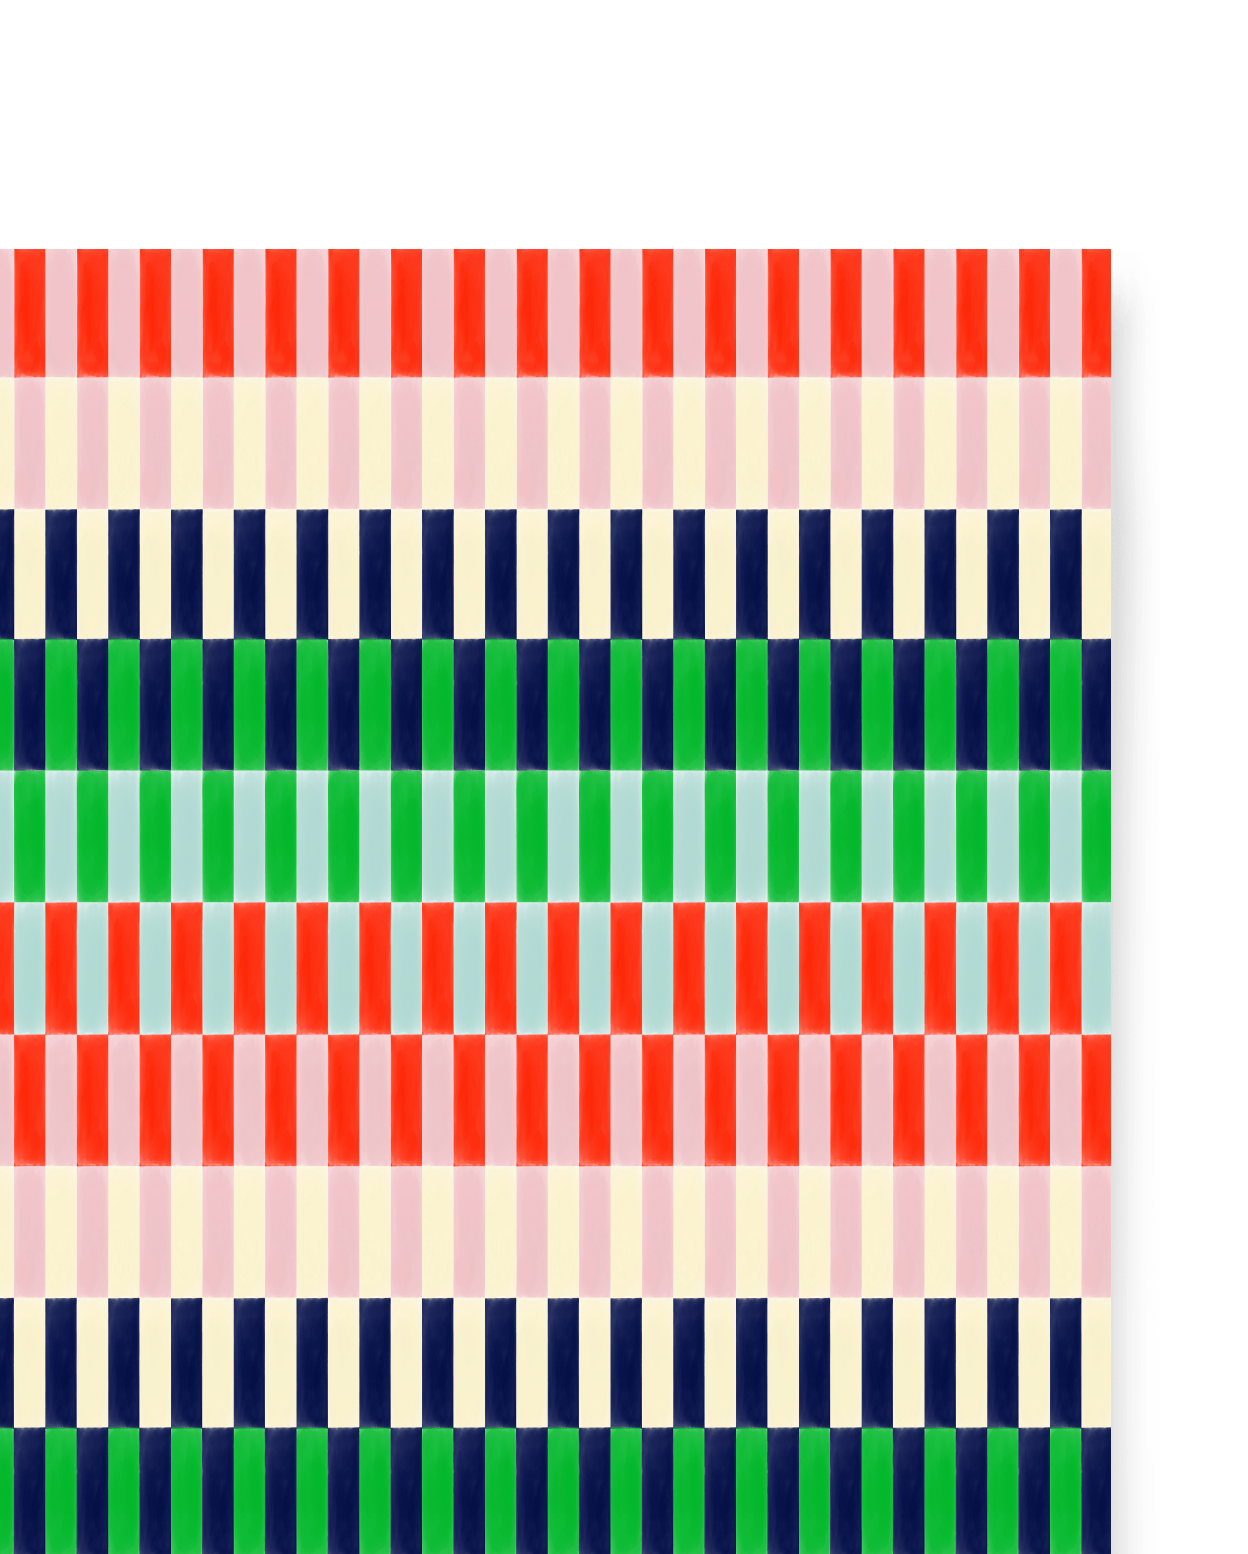 Black, navy blue, red, pink, green, and peach alternating stripes.